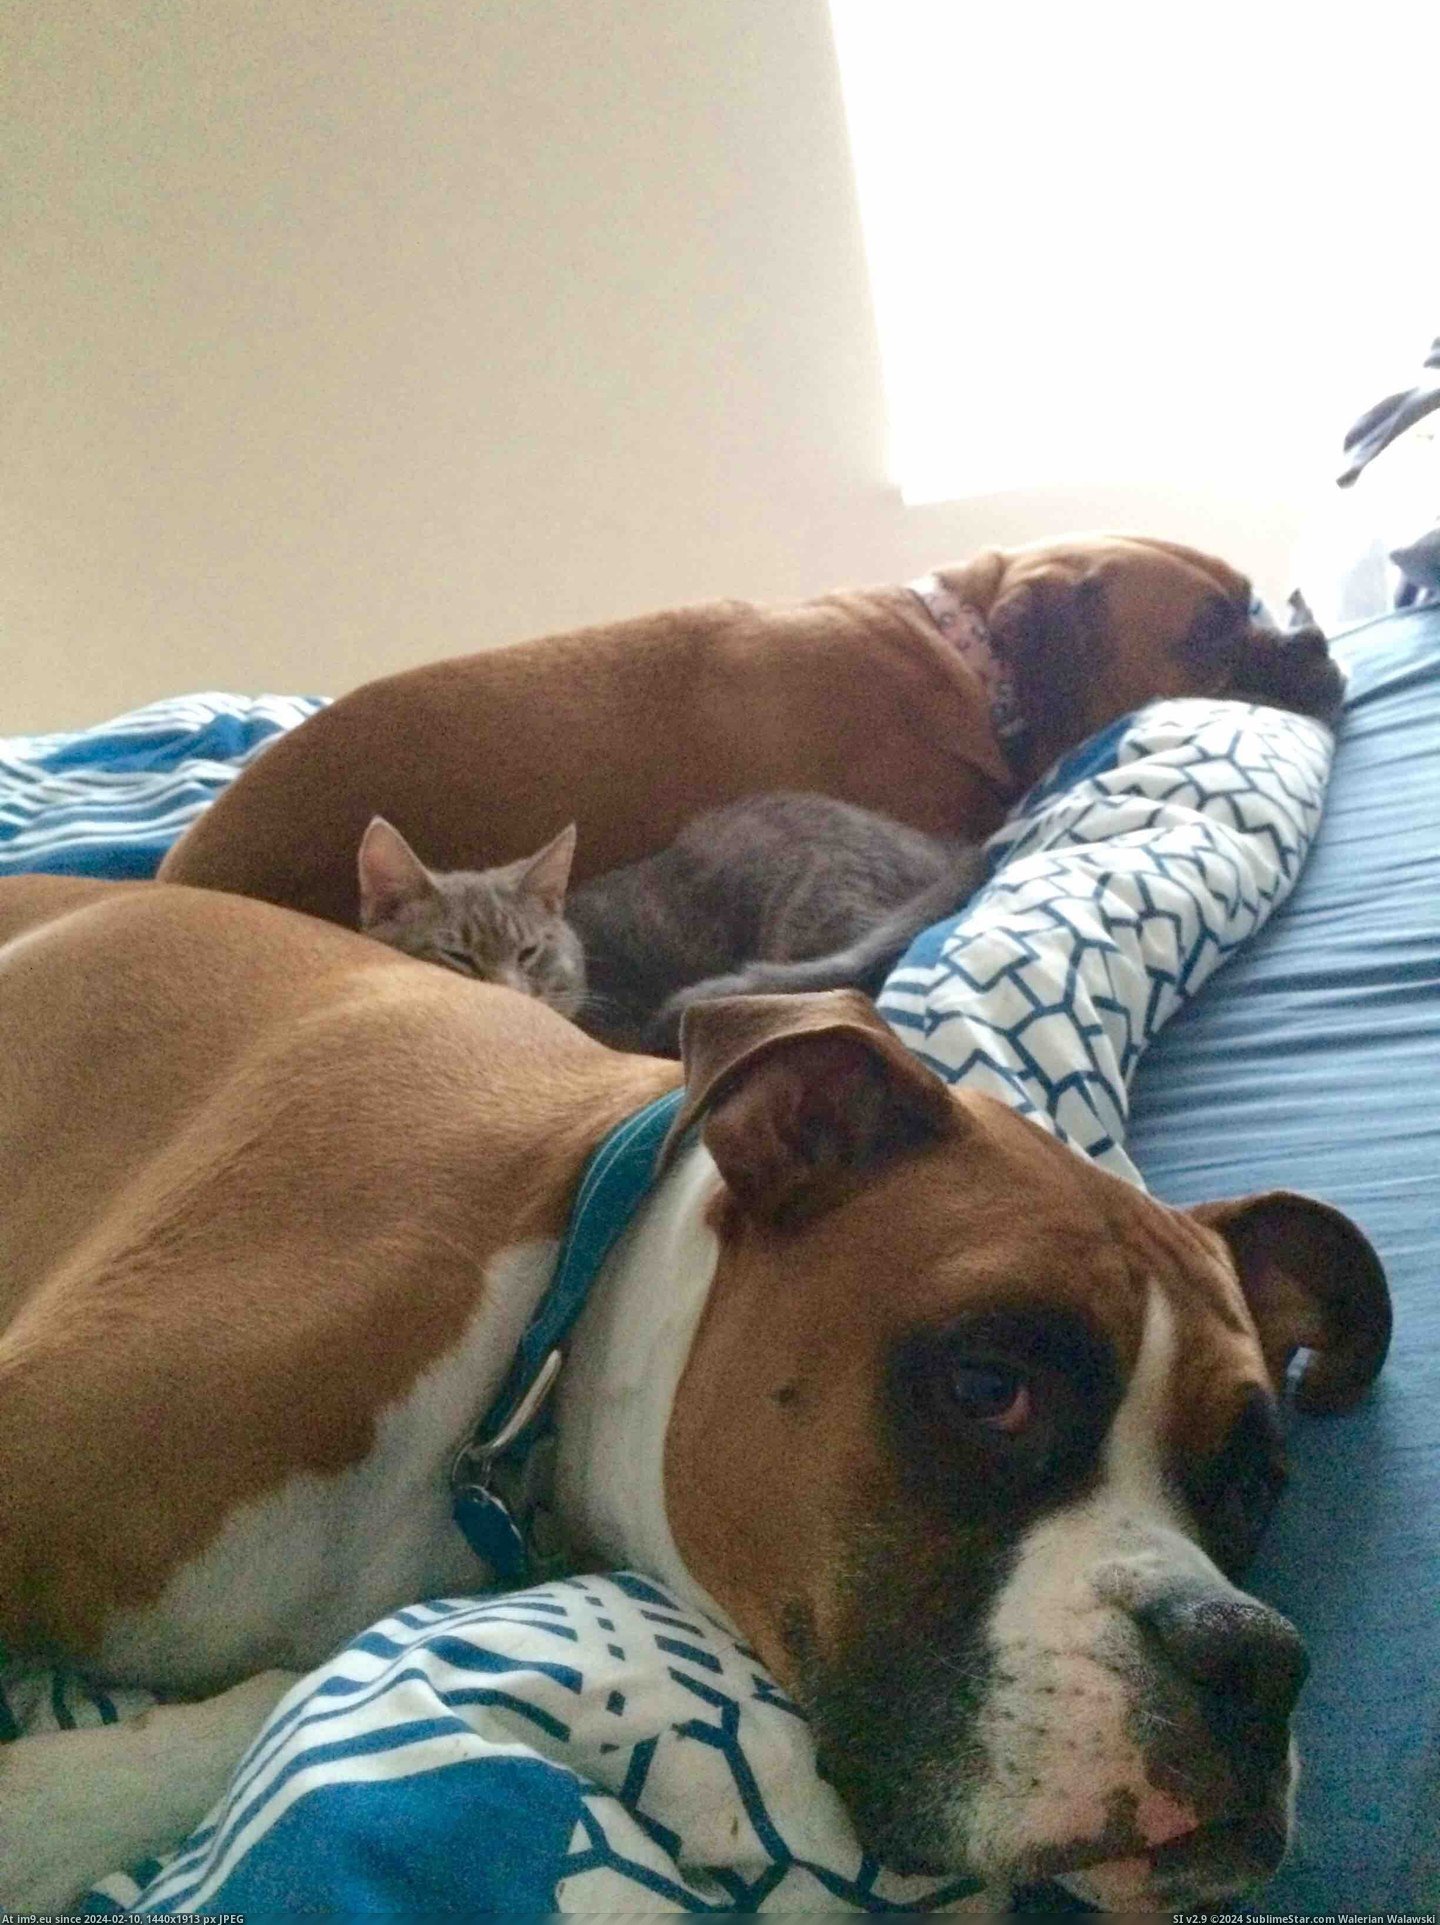 #Feel #Sick #Crew #Afternoon [Aww] Went home sick yesterday, this was my feel better crew all afternoon. Pic. (Image of album My r/AWW favs))